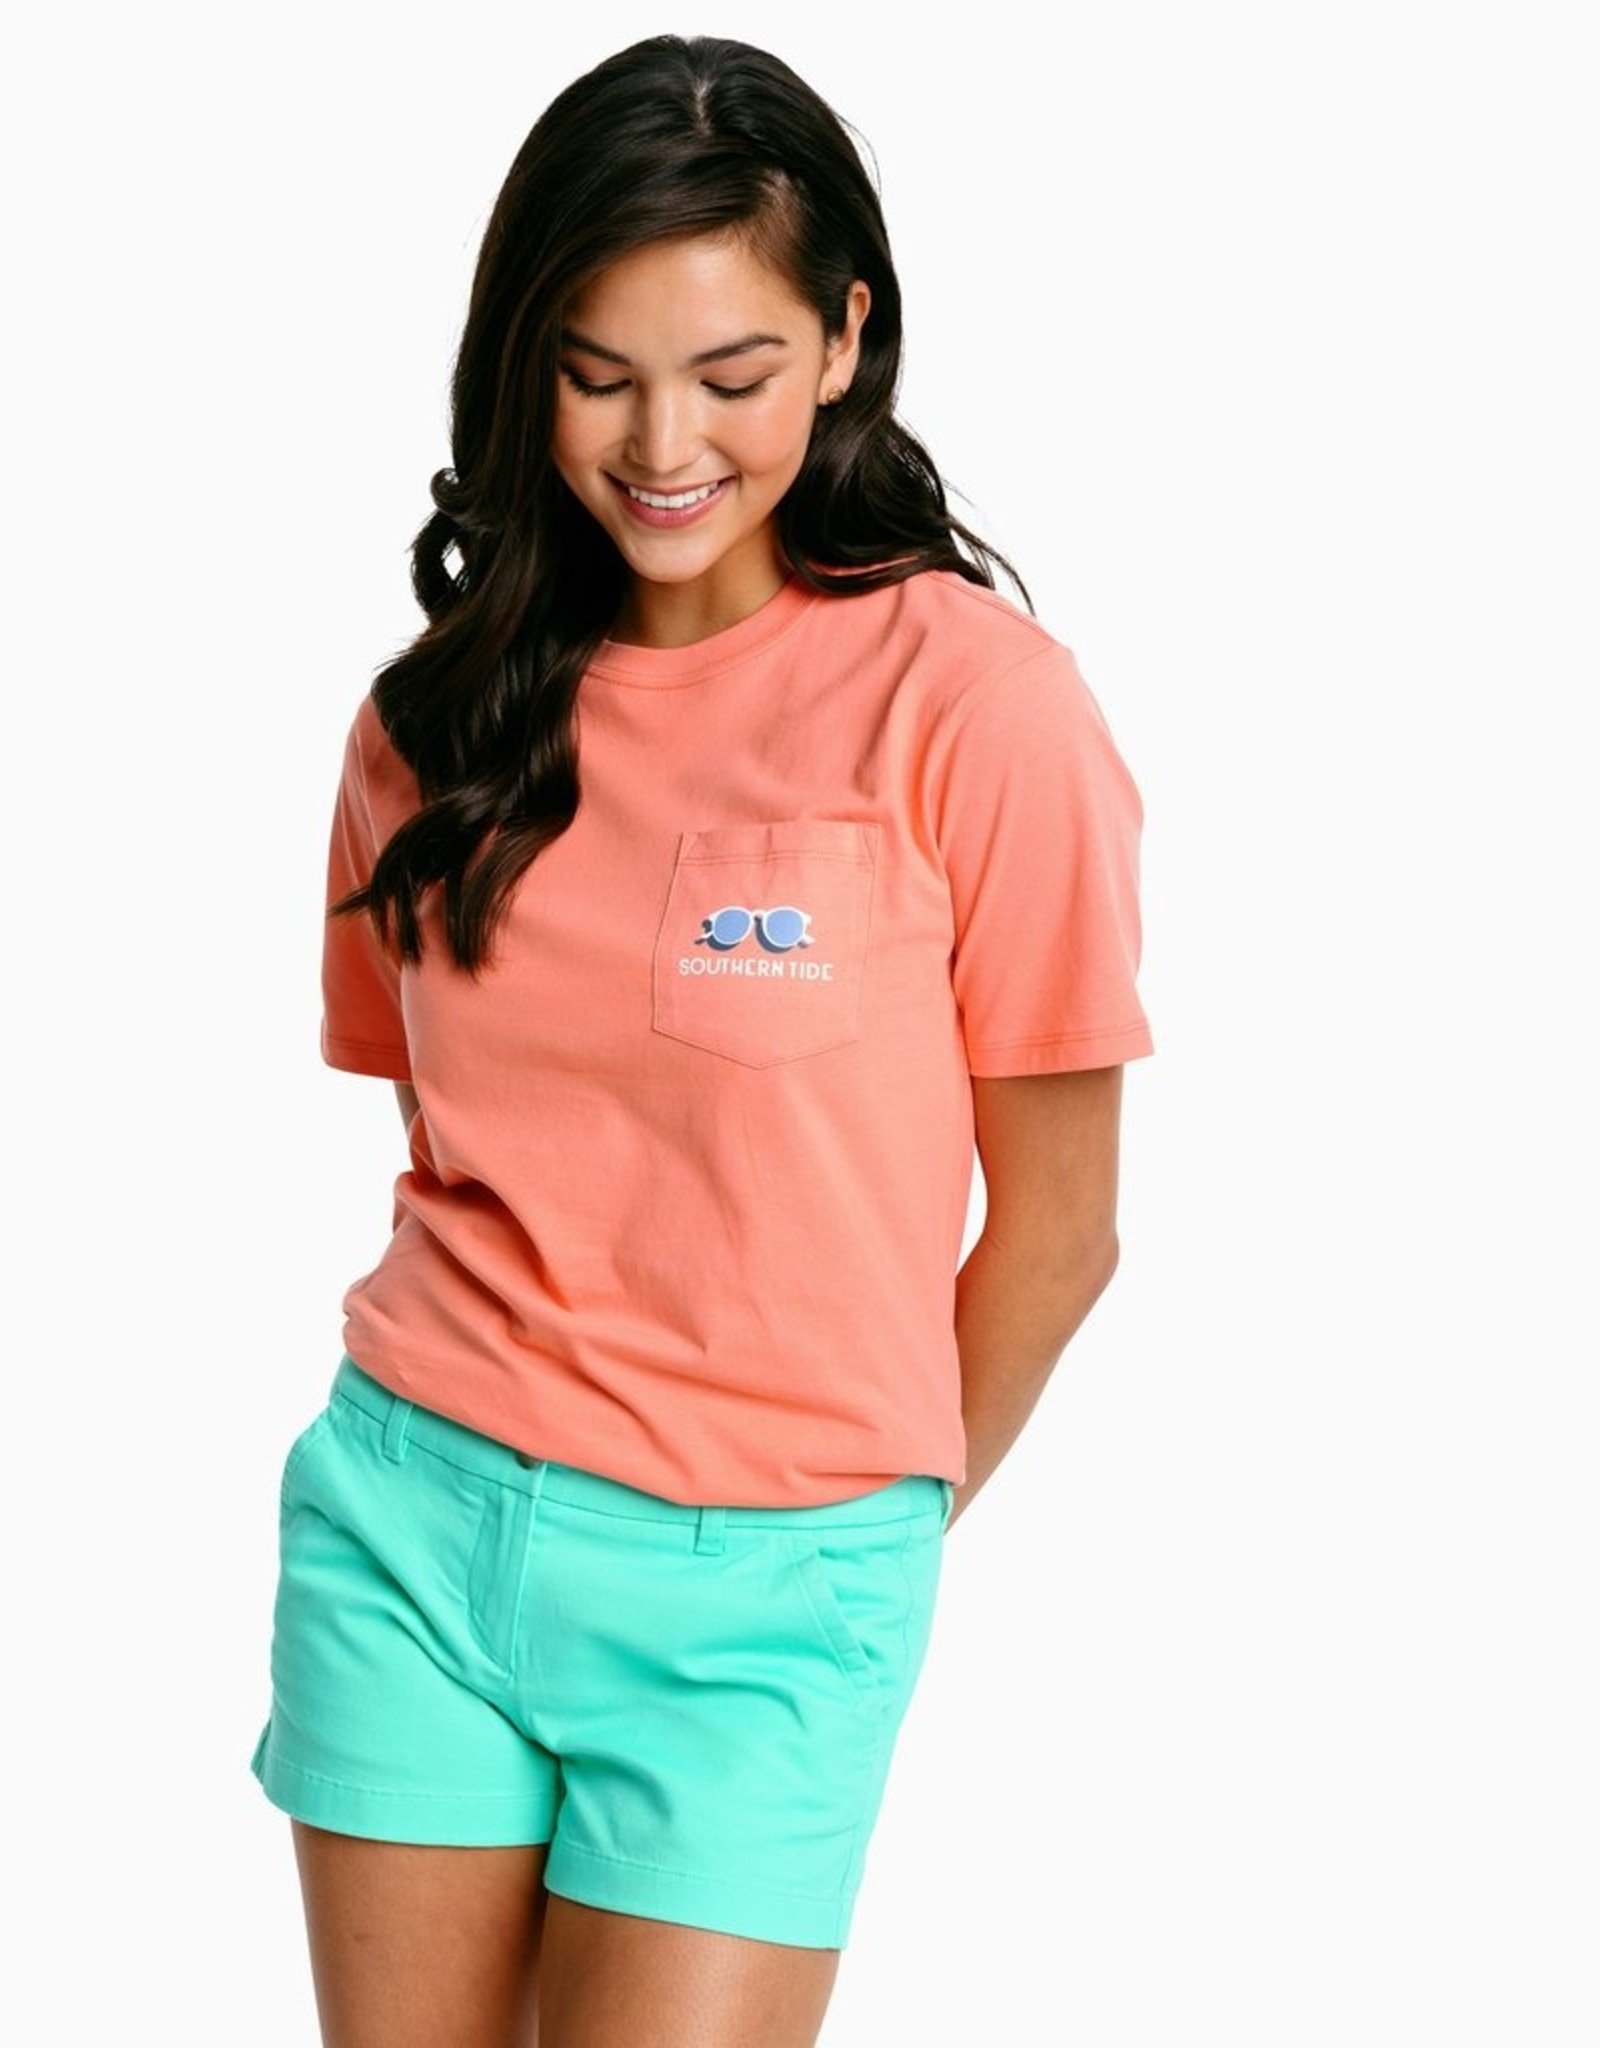 Southern Tide Seas the Day Tee